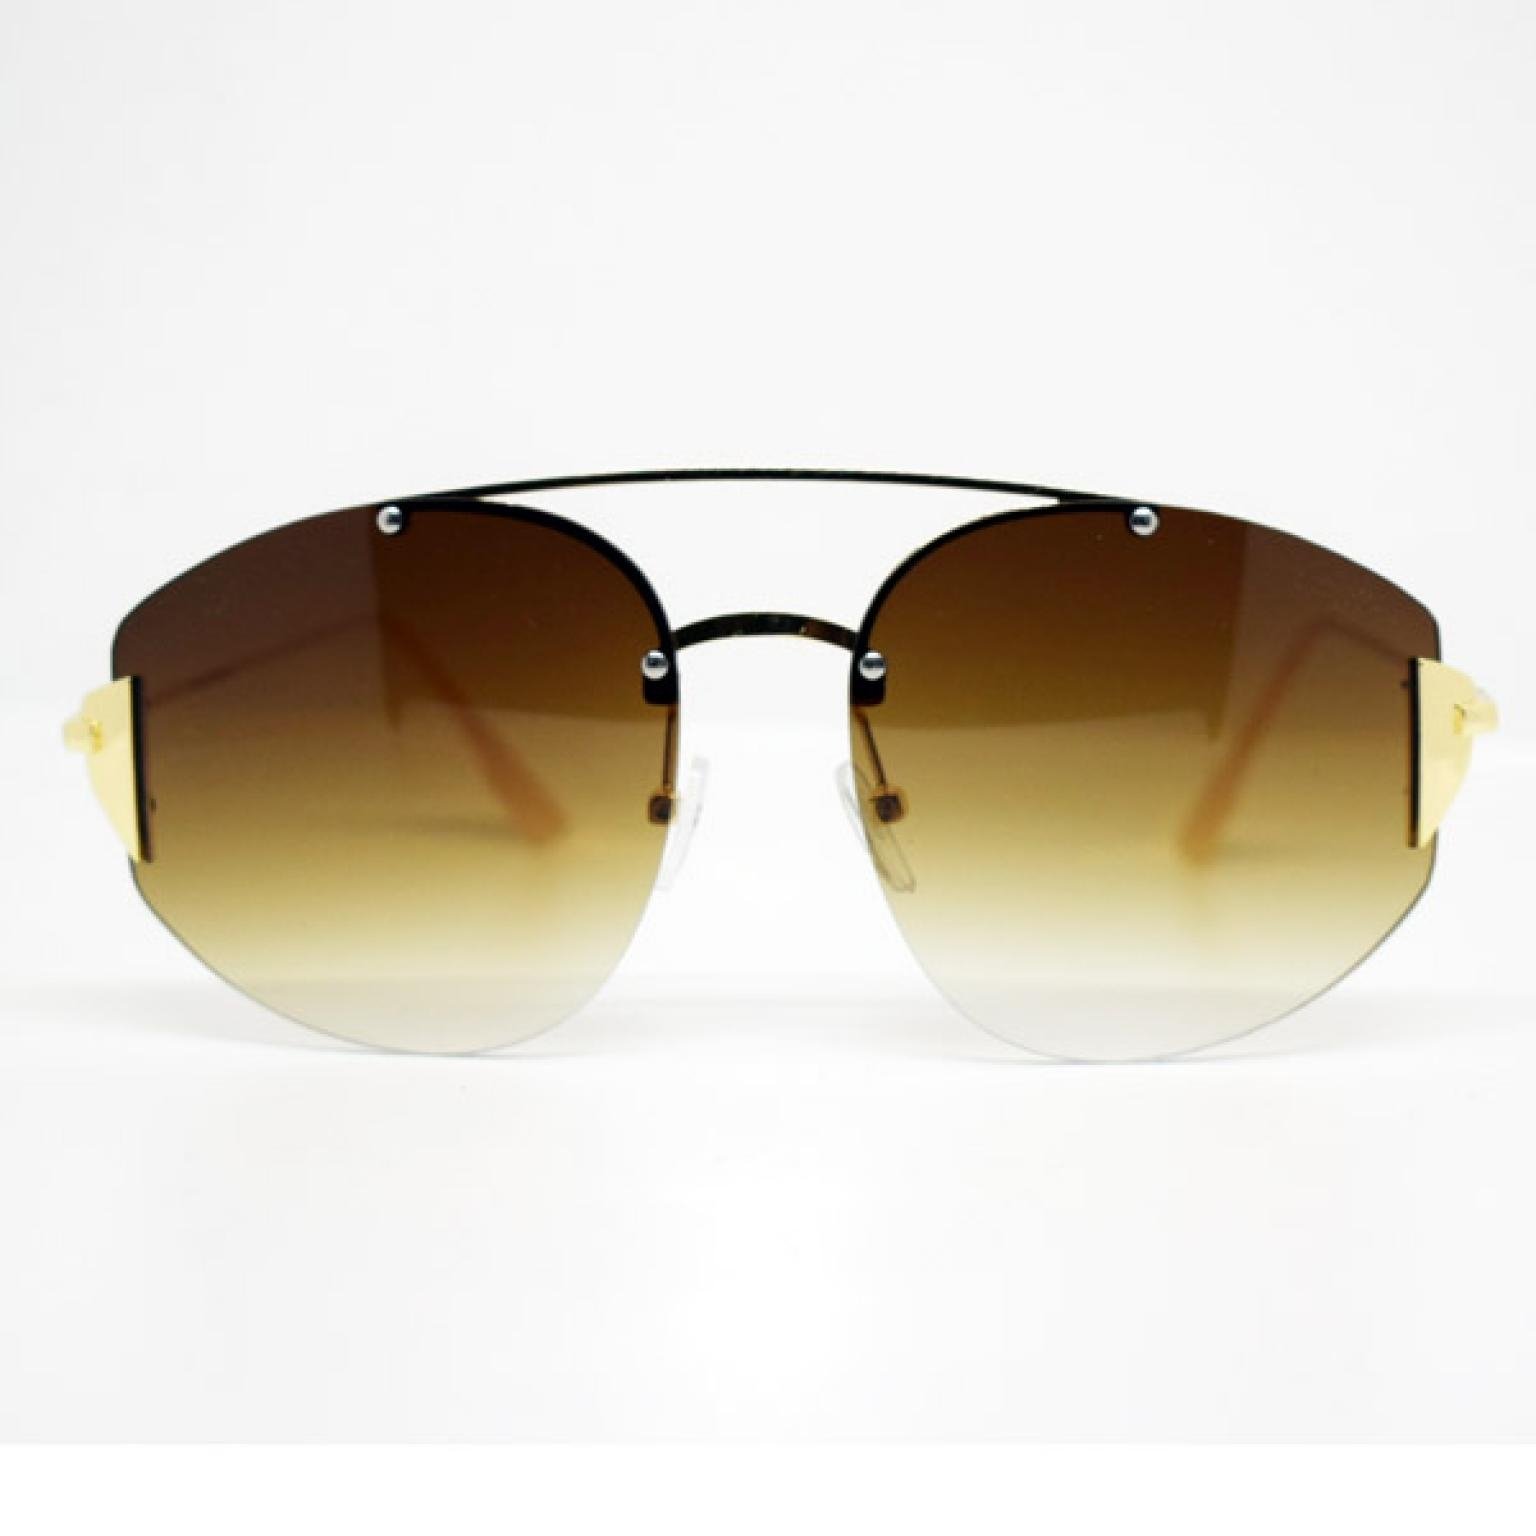 LADIES TRENDY SUNGLASS BROWN LENS WITH GOLDEN FRAME FOR WOMEN |SGM-90|